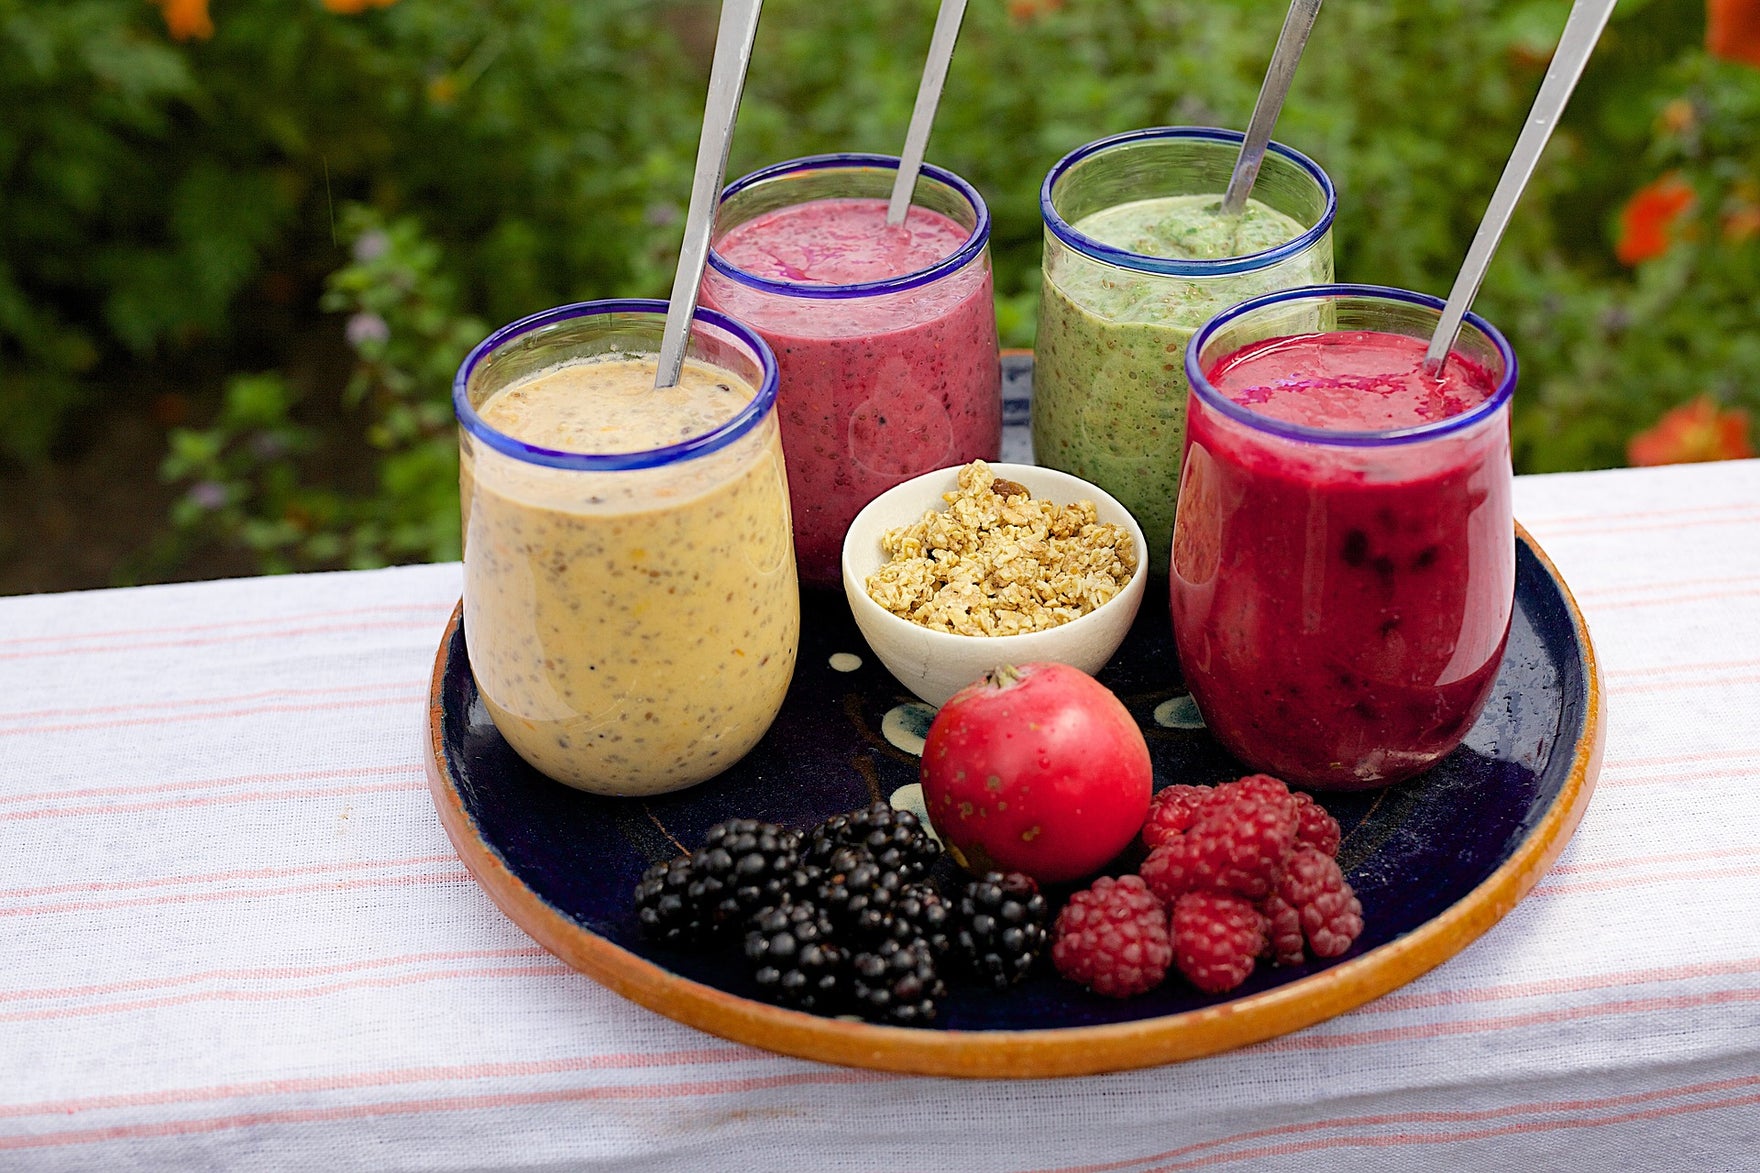 Tips on Finding the Right Blender for Your Smoothies